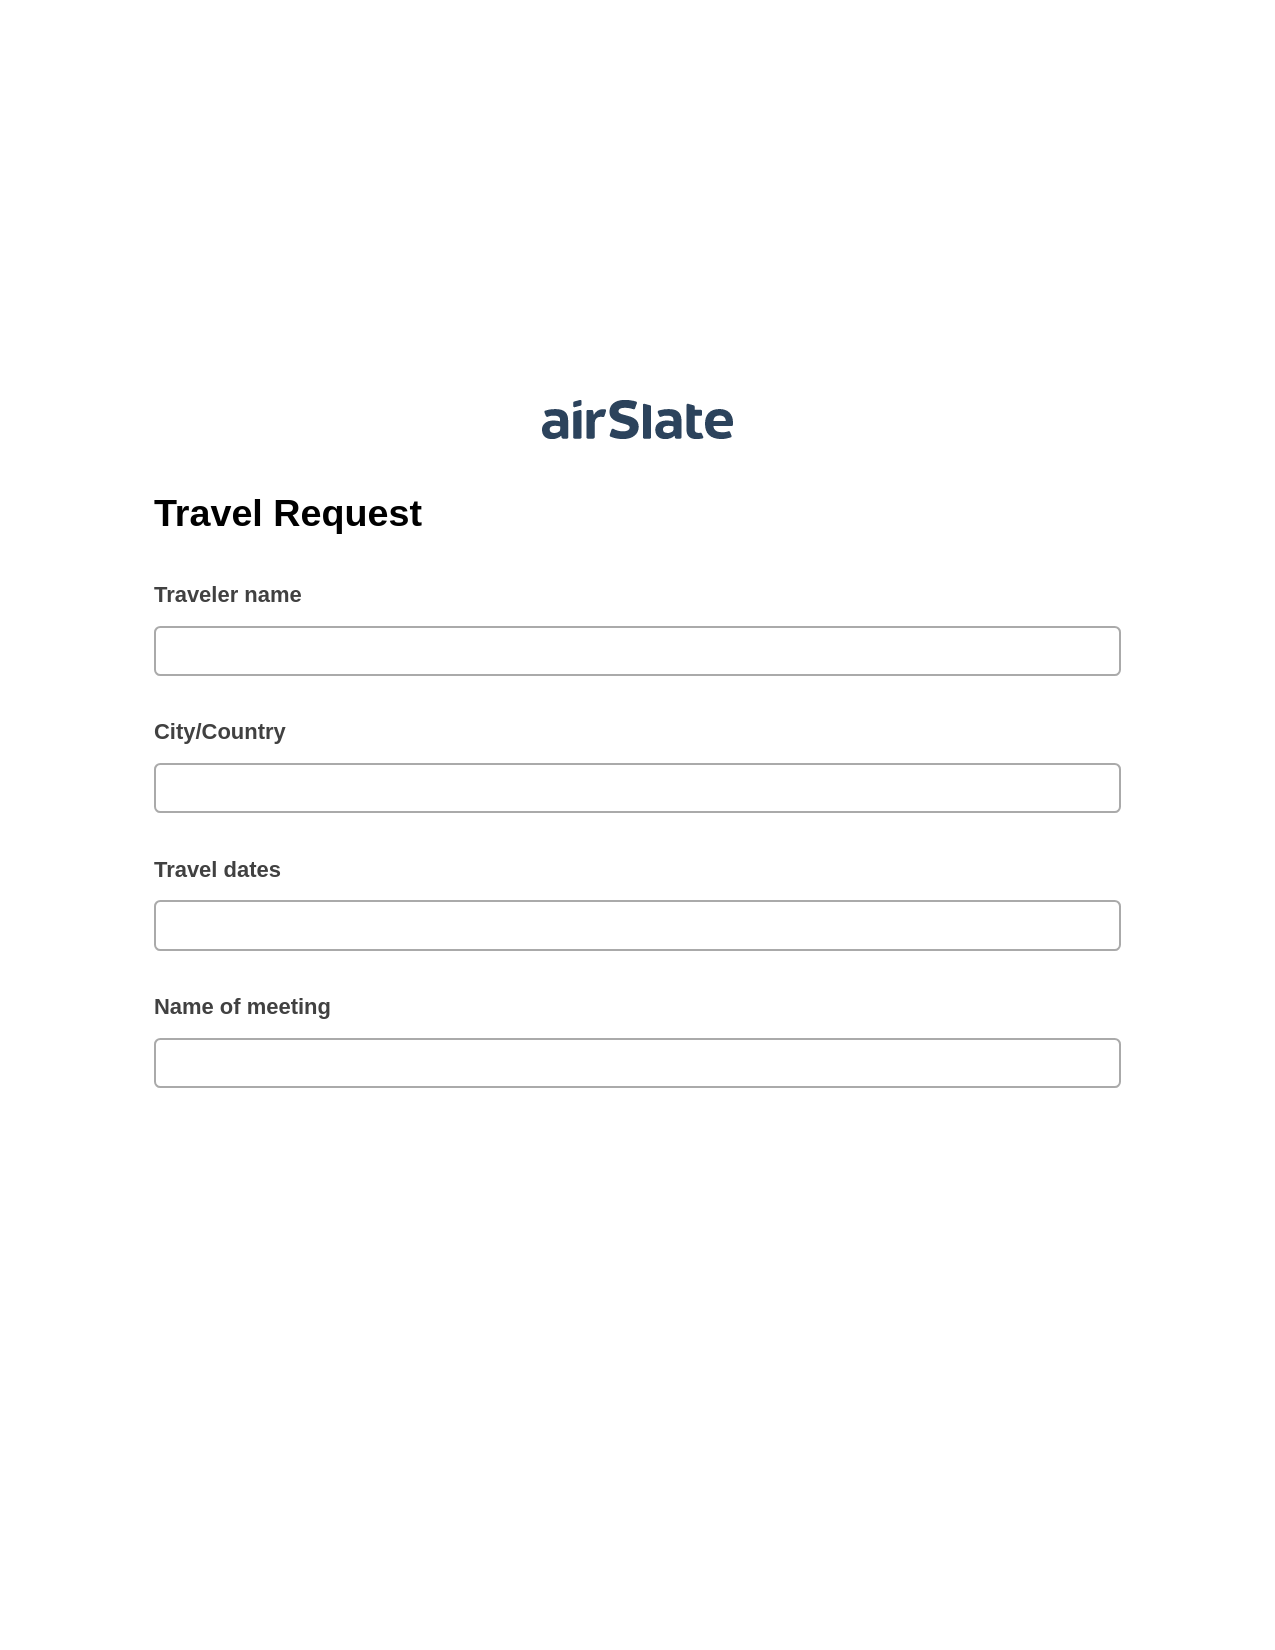 Travel Request Pre-fill from Excel Spreadsheet Bot, Hide Signatures Bot, Google Drive Bot